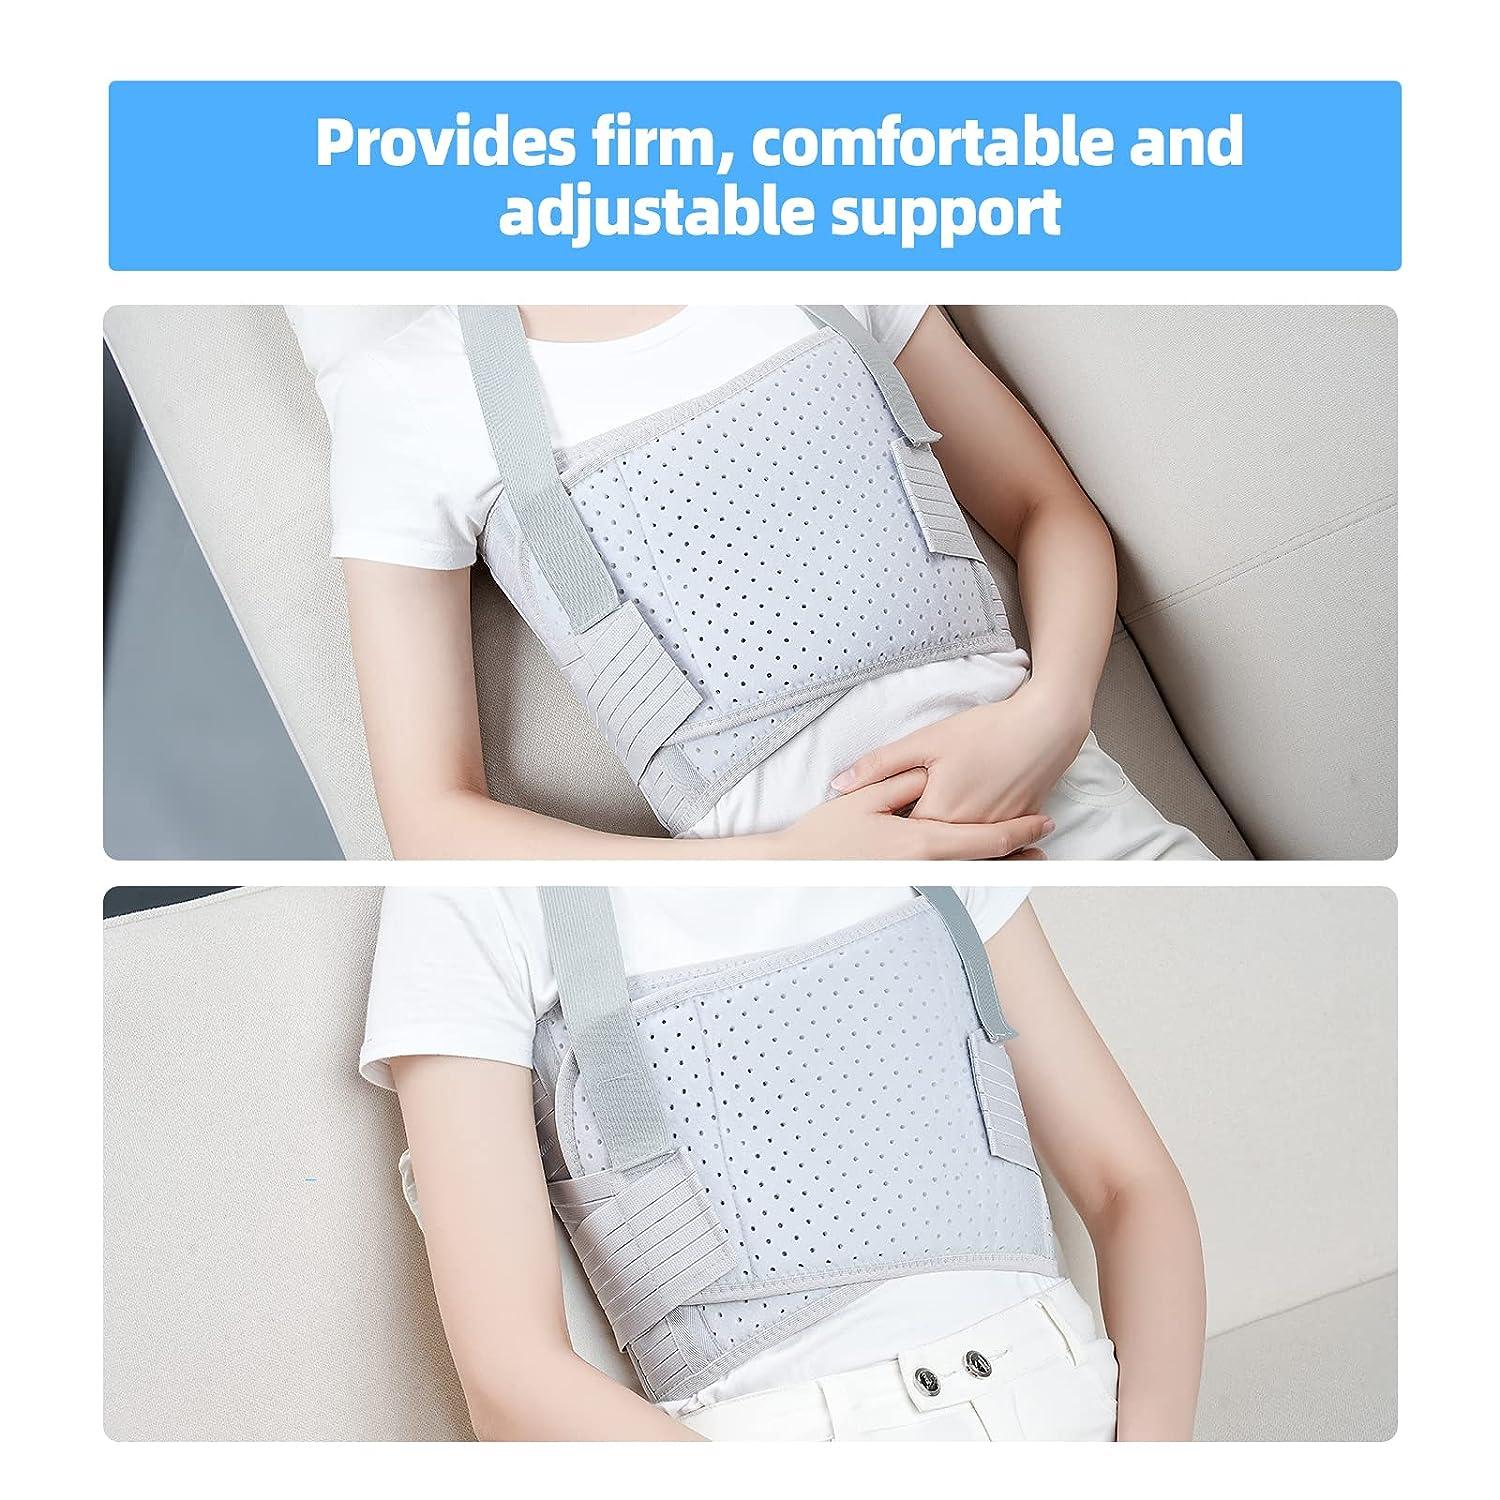  Rib Belt Chest Binder for Broken Injury Ribs, Elastic Rib Brace  Compression Support to Reduce Rib Cage Pain, Fractured, Dislocated and  Post-Surgery Ribs (S (25 to 33)) : Health & Household